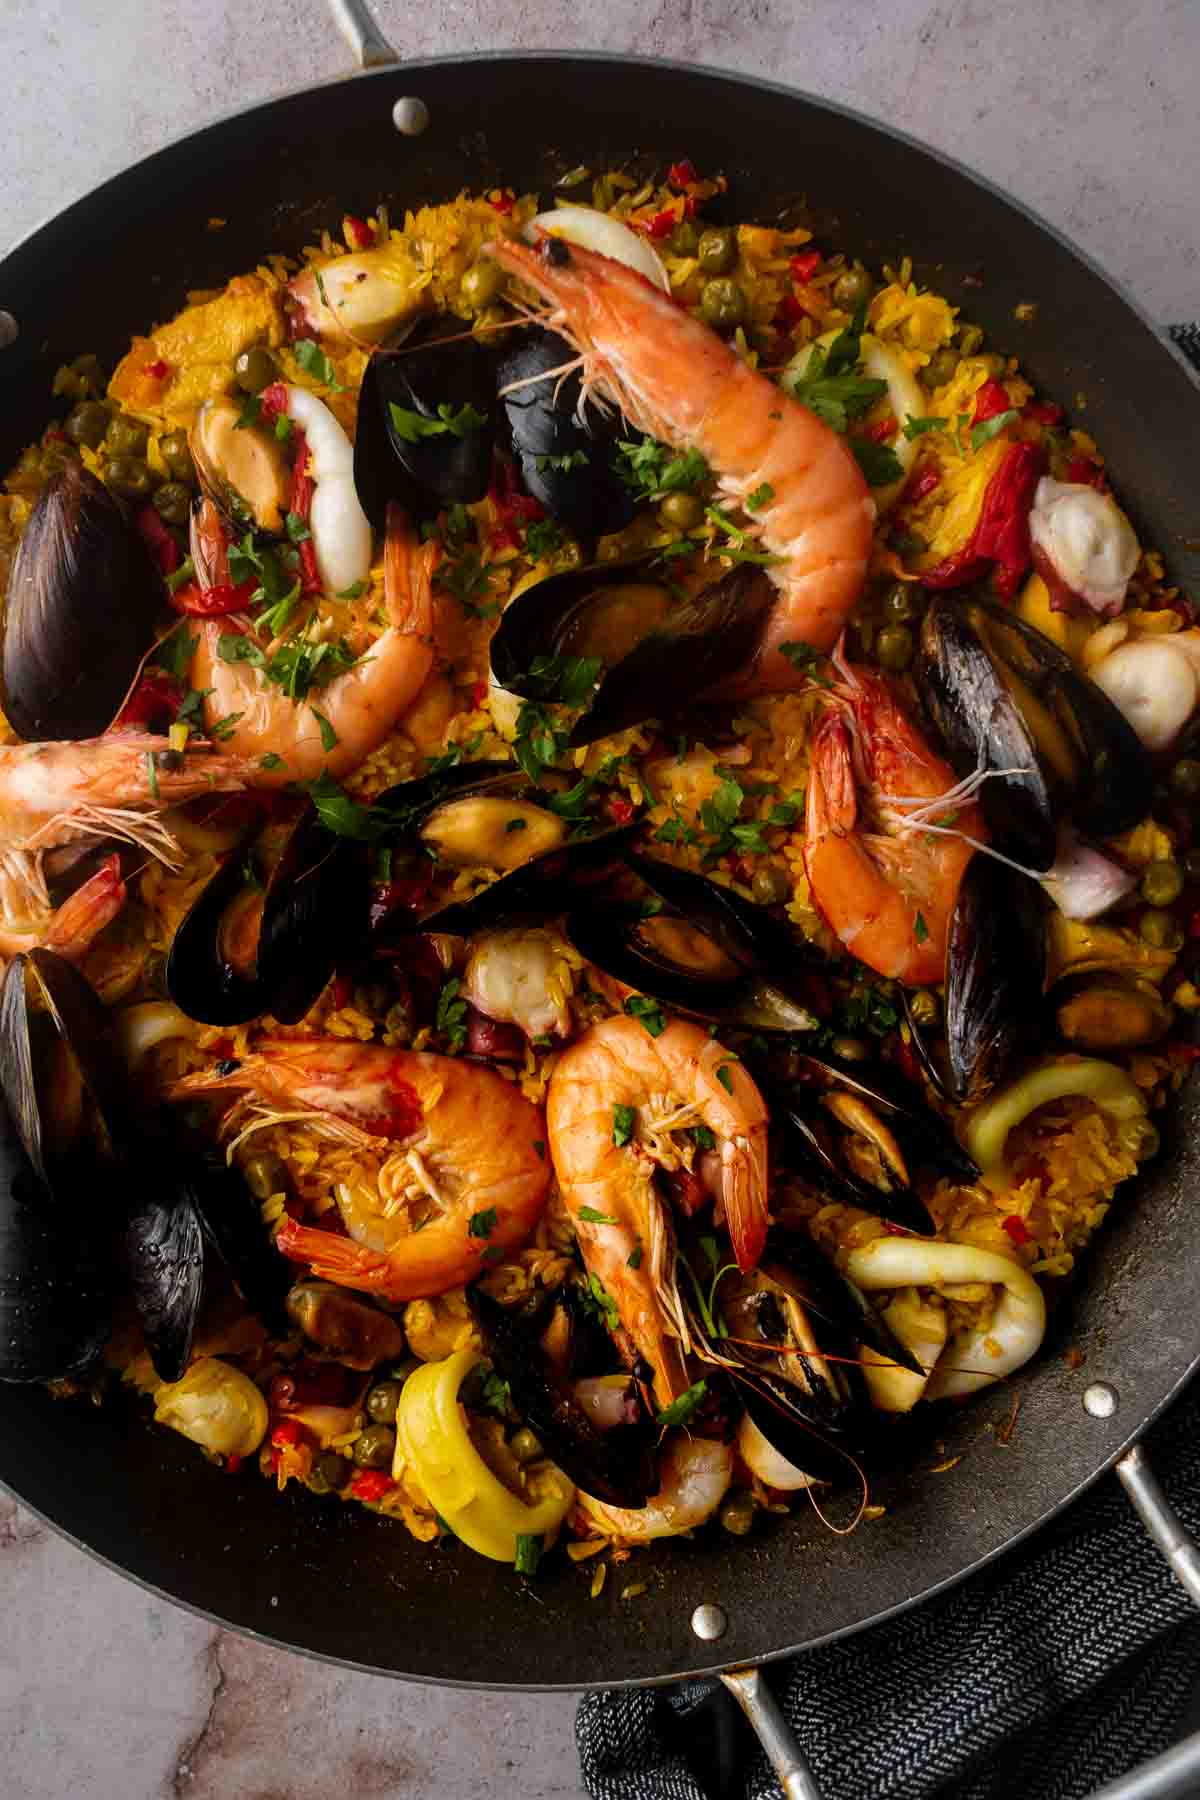 Seafood Paella Valenciana with prawns, chicken, mussels, and calamari.